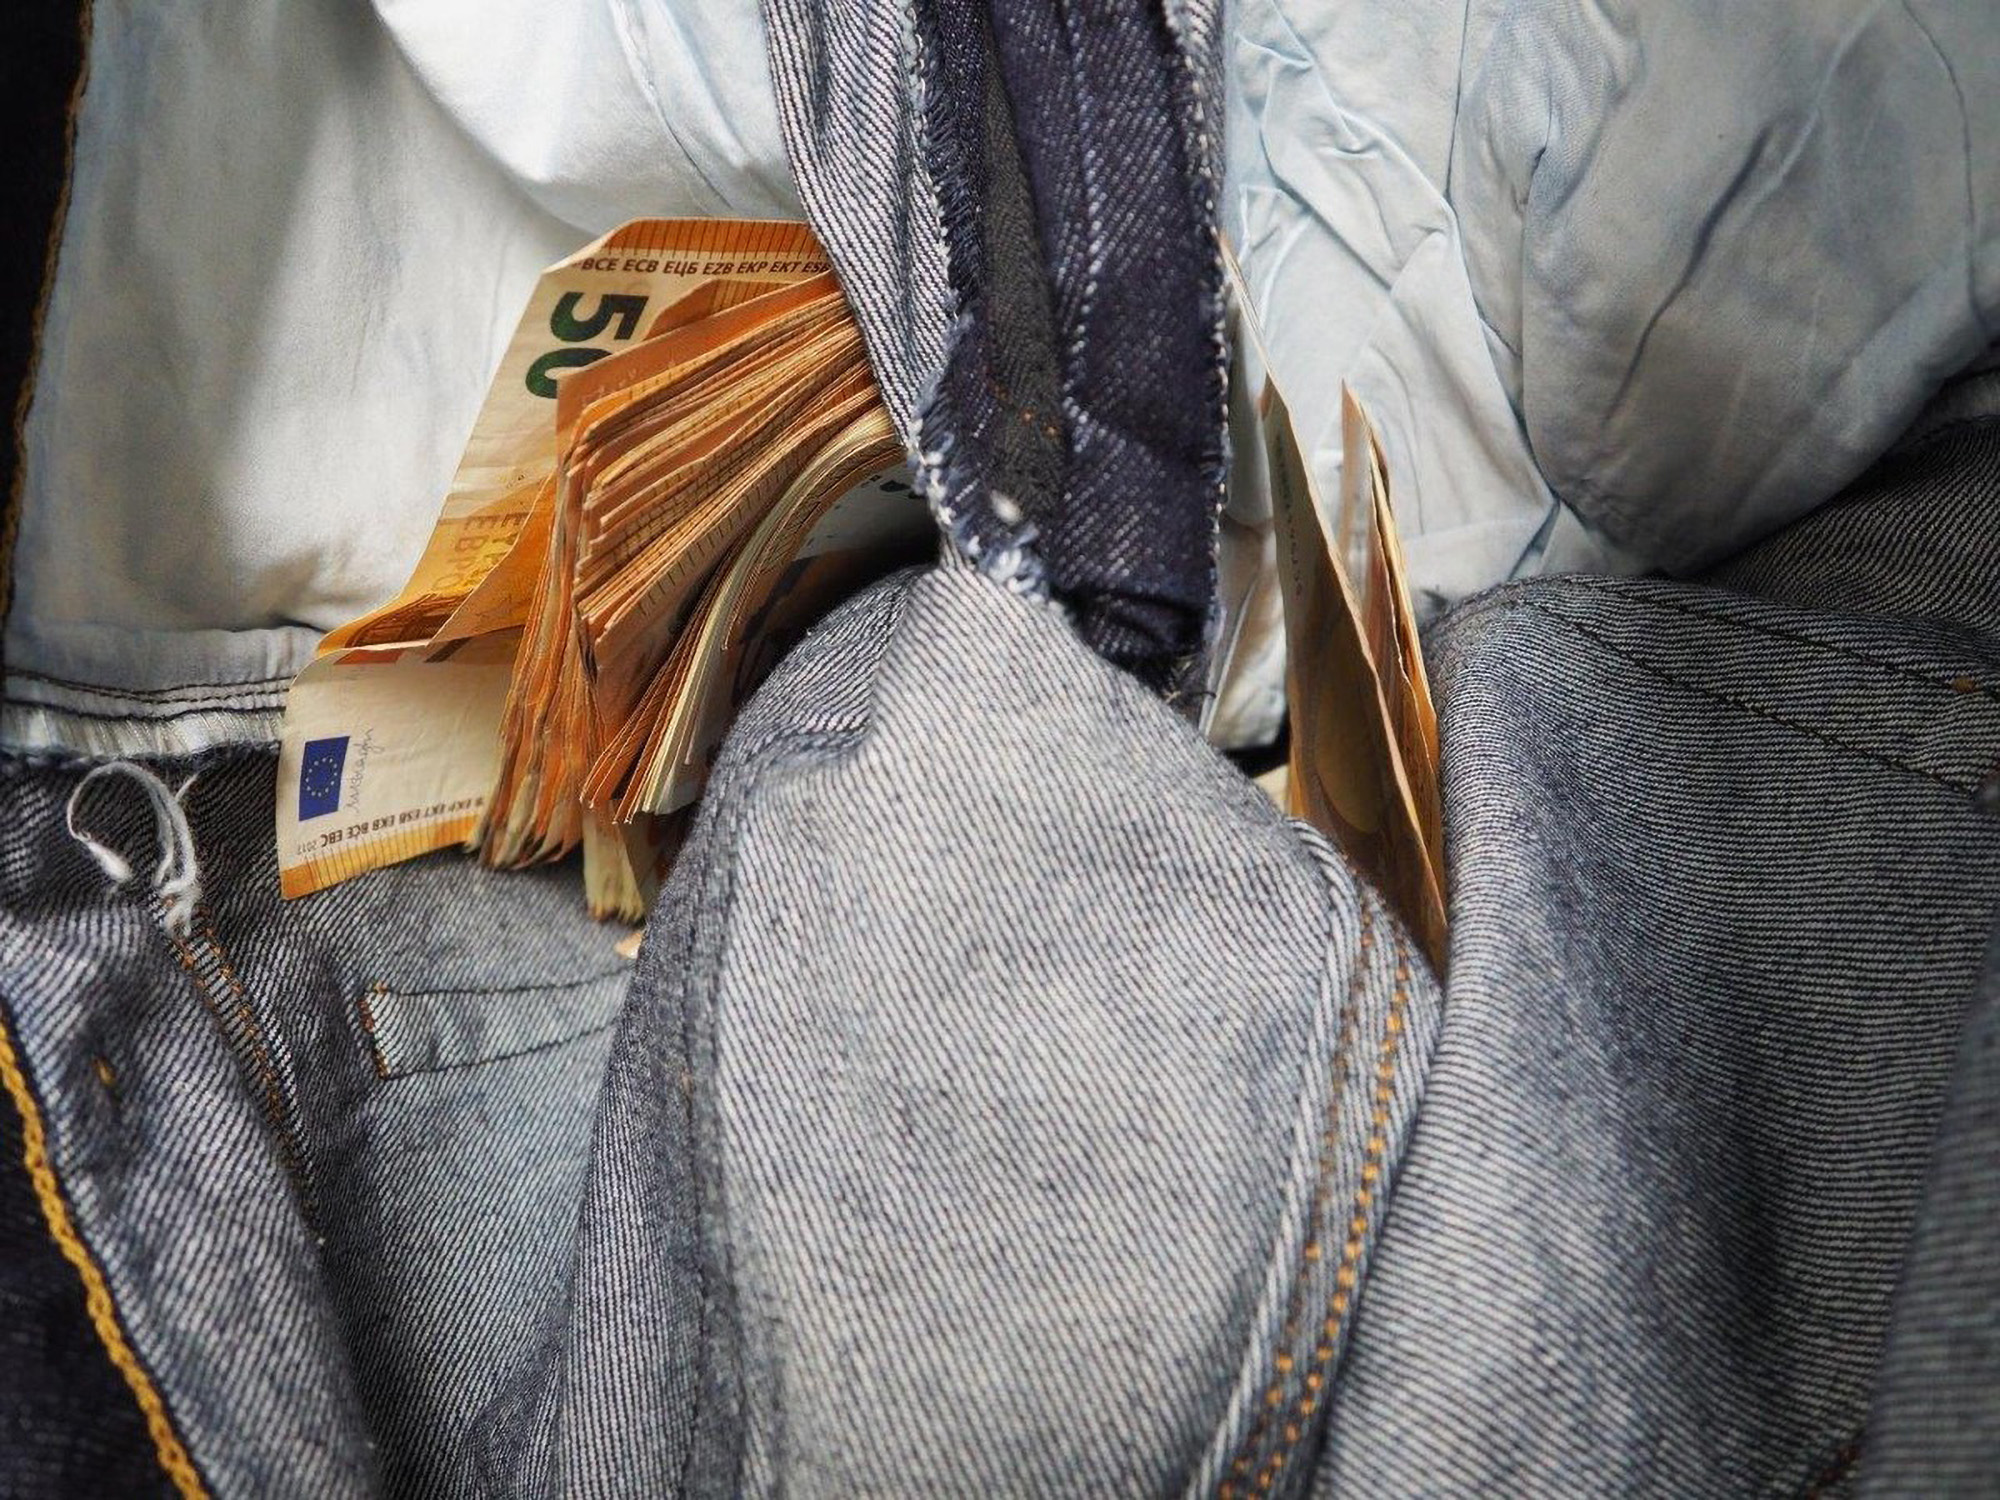 Read more about the article Customs Cops Seize GBP 120,000 Stashed Inside Denims